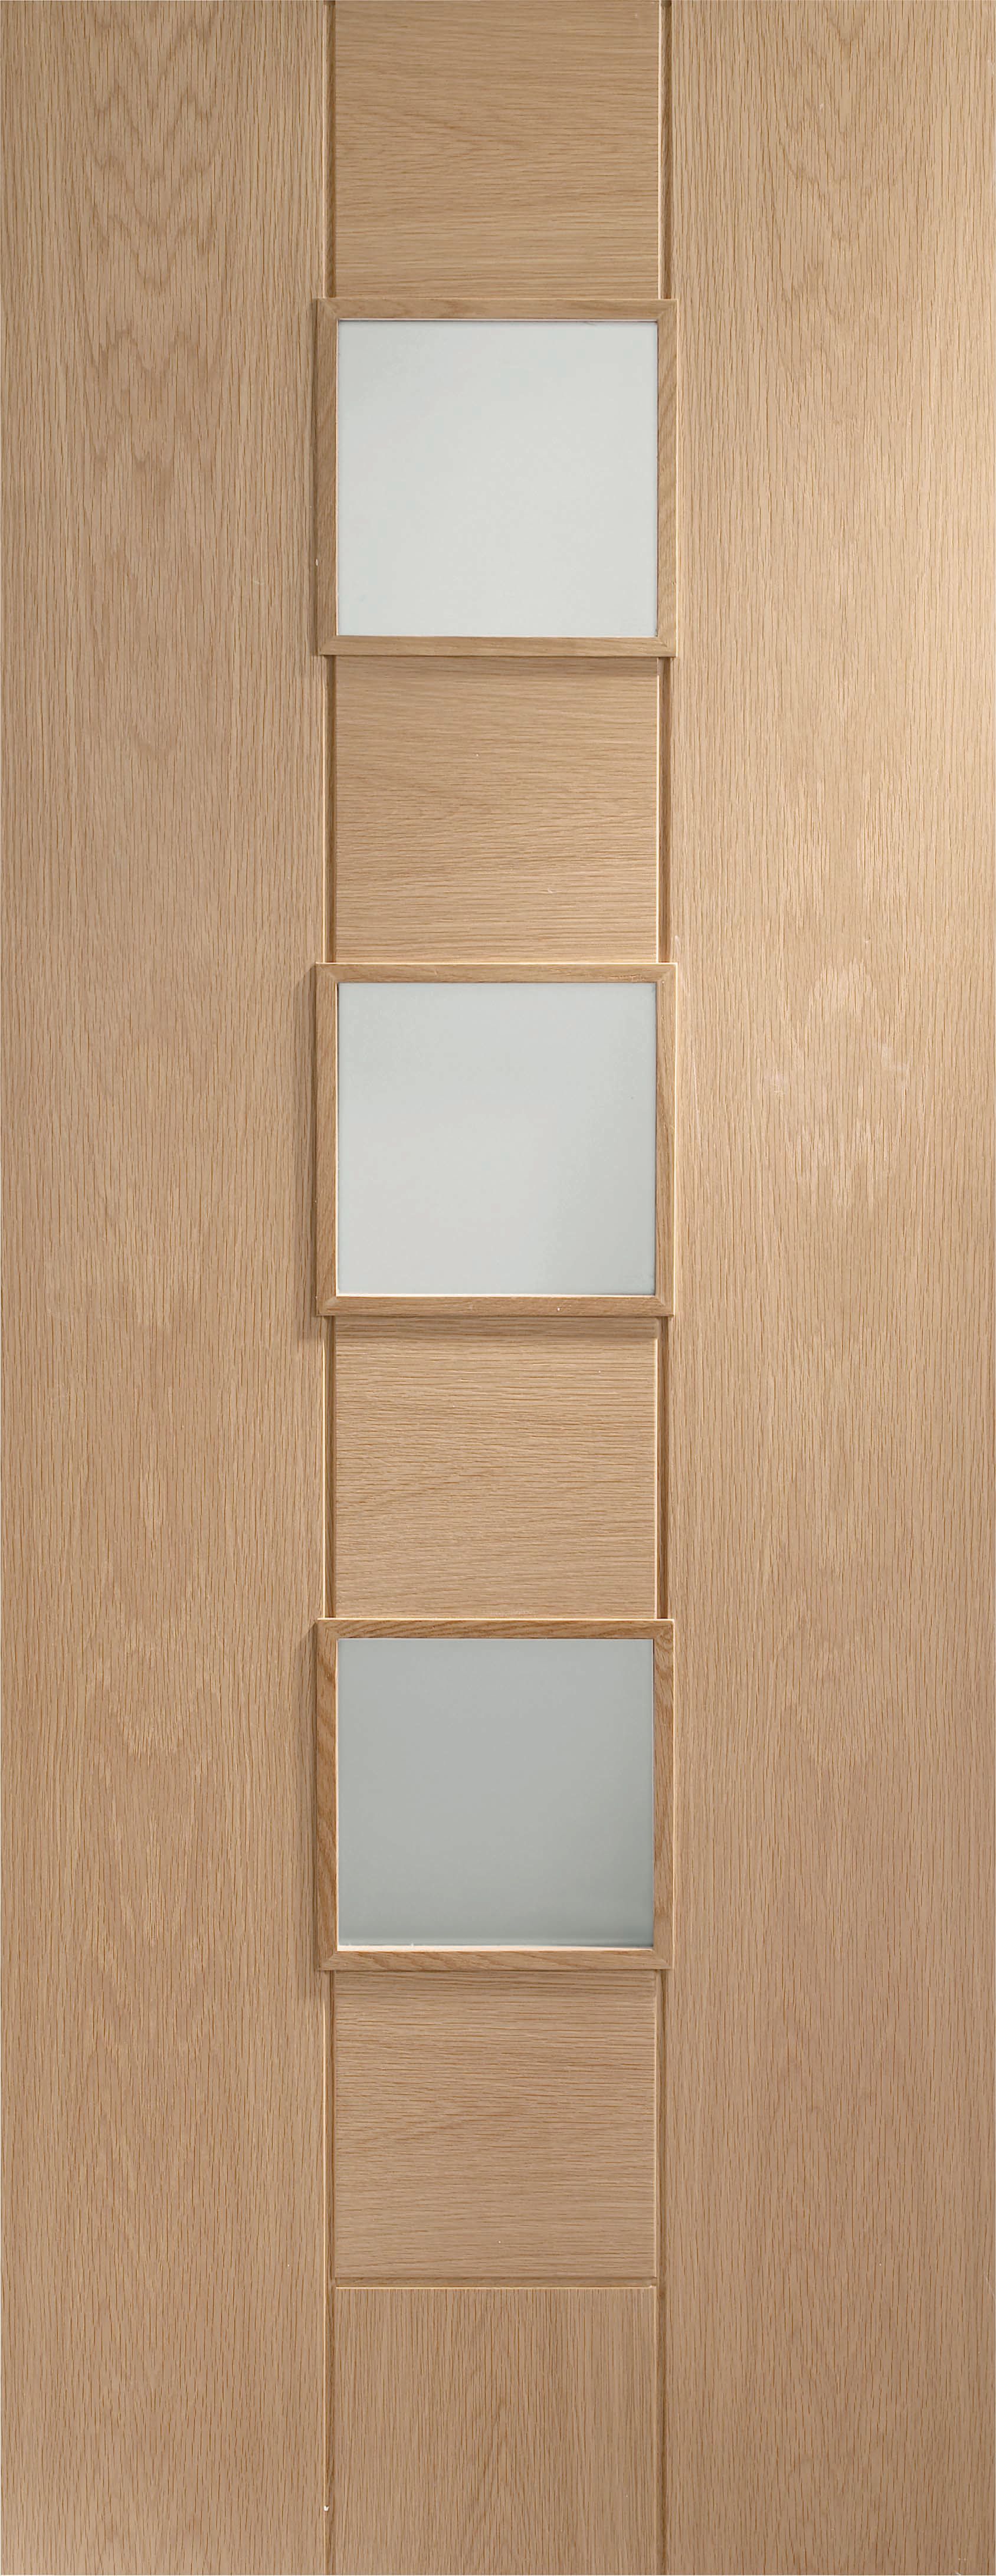 Image of XL Joinery Messina Clear Glazed Oak 8 Panel Pre Finished Internal Door - 1981 x 762mm